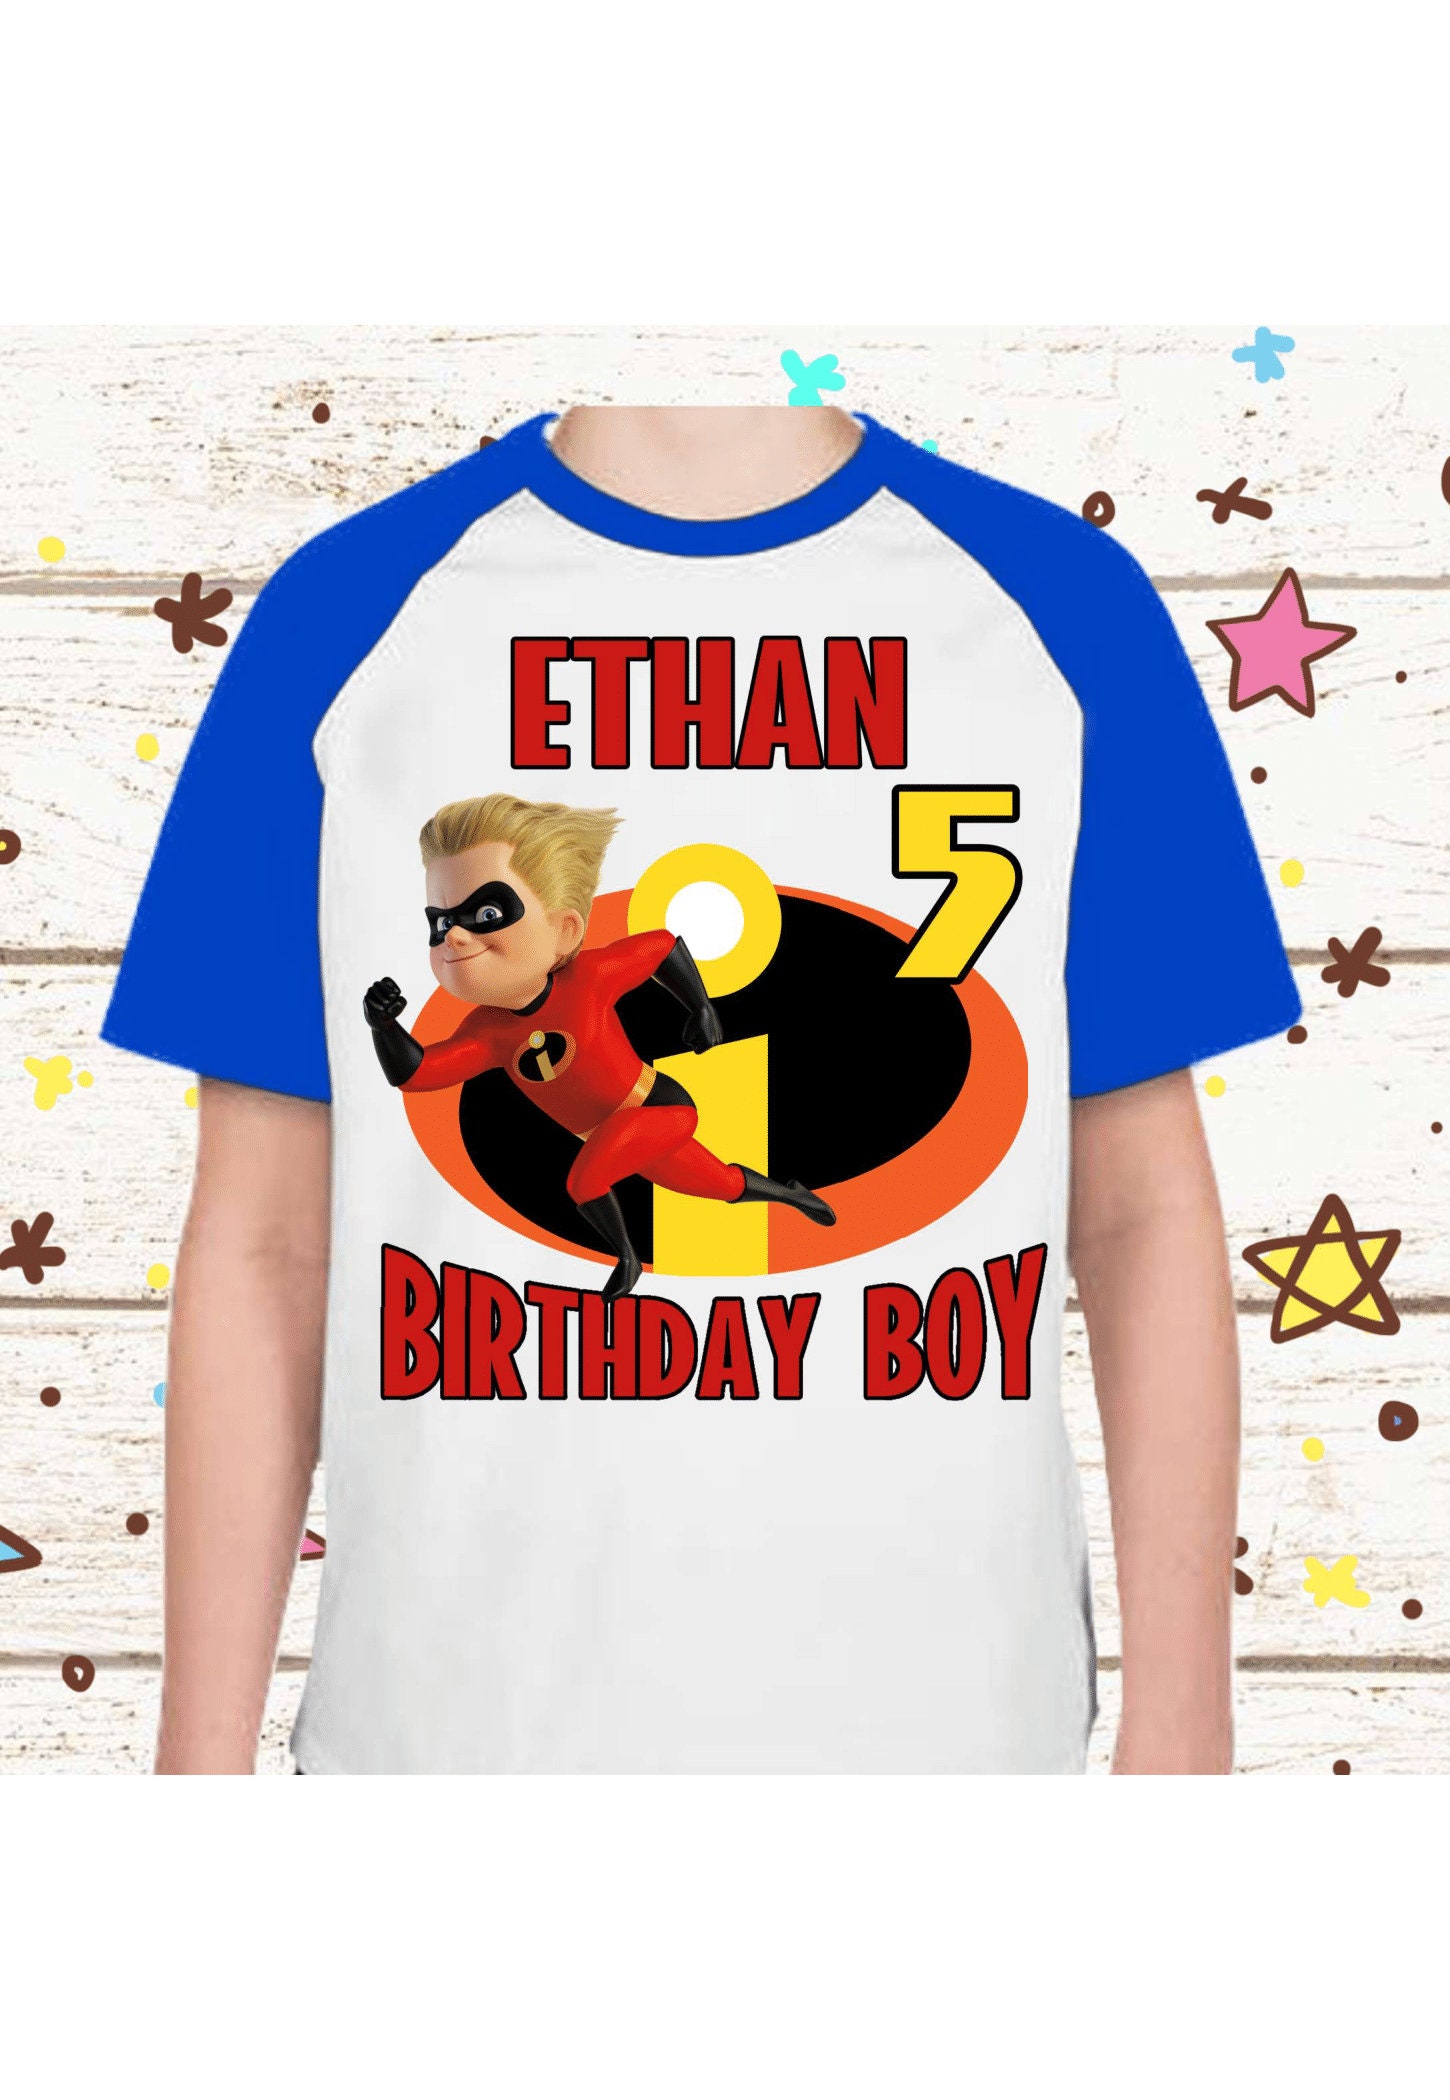 Discover Incredibles Birthday Shirt Personalized Name and Age Family Incredibles Party theme shirt All sizes family shirt gift birthday